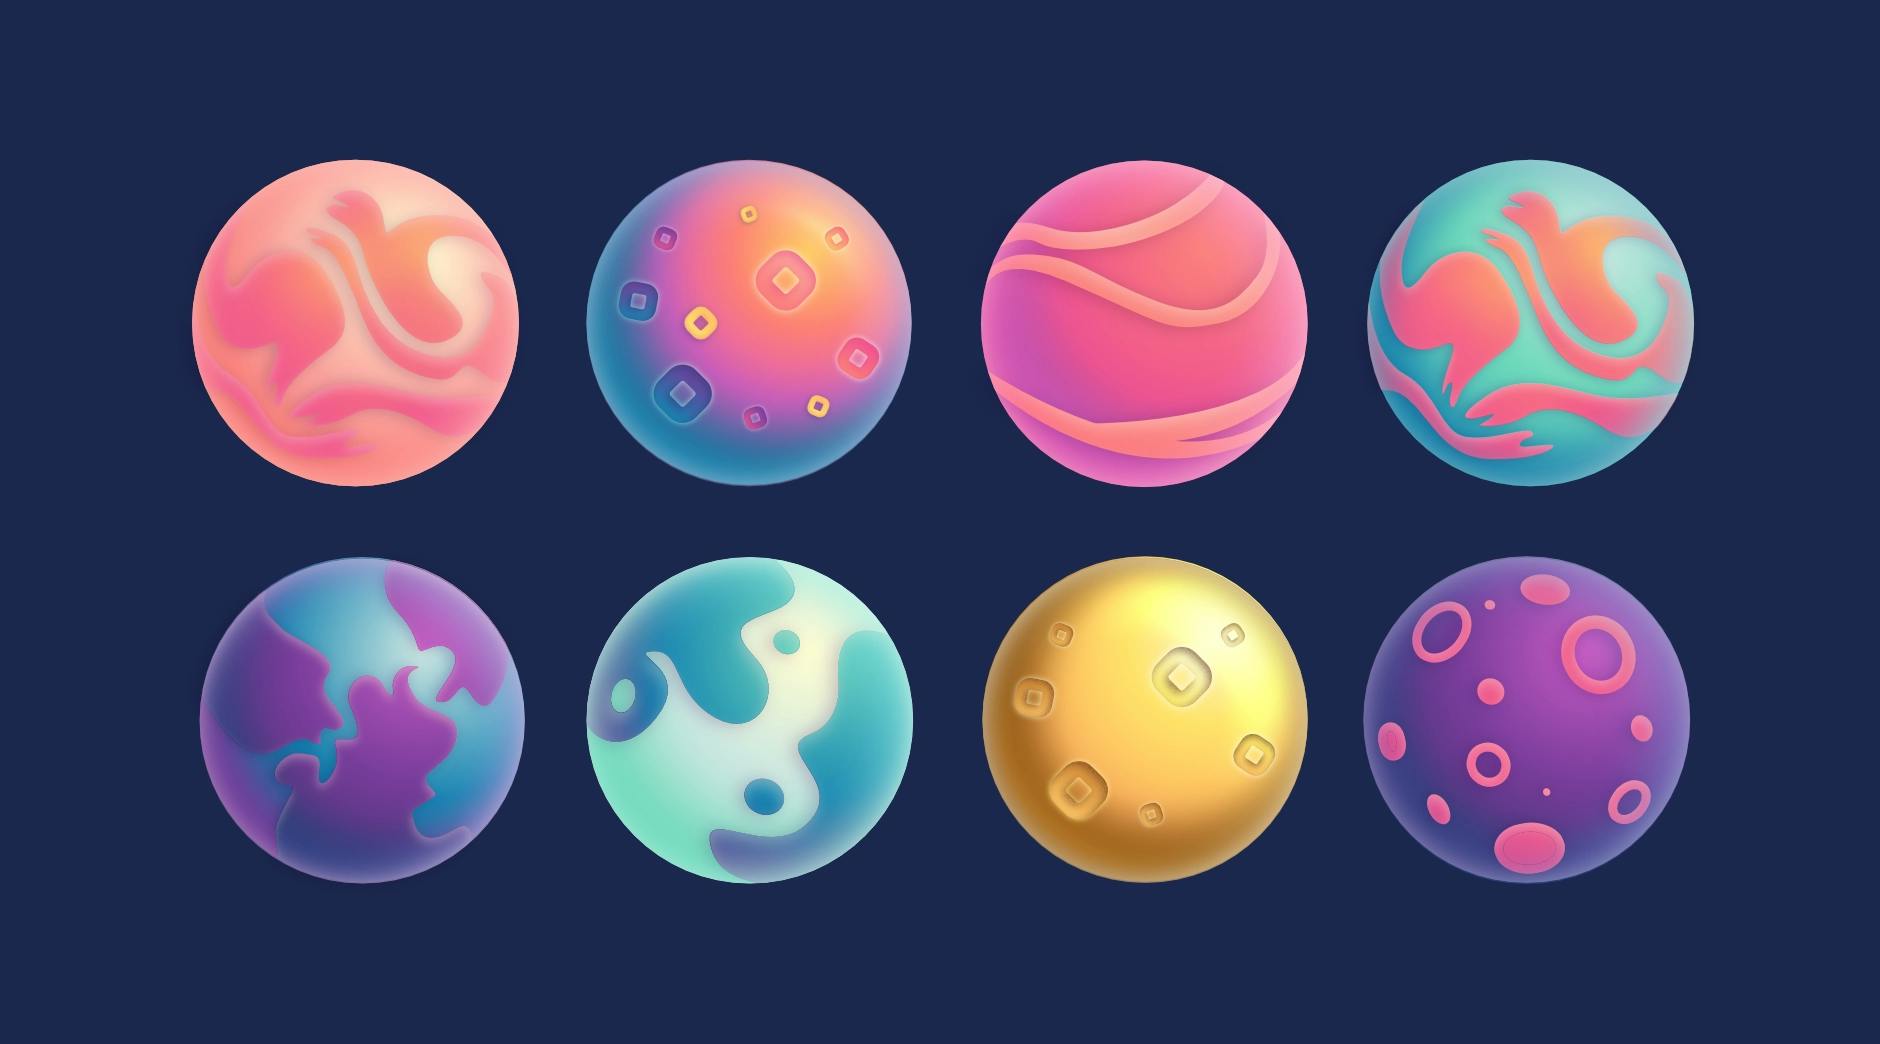 eight planets created from the procedural algorithm.  two have wispy, cloud-like features. another has continent-like features, and another has craters. two planets feature coin-shaped indentations -- these are the coin planets from which the player can collect lots of coins if they orbit around it!